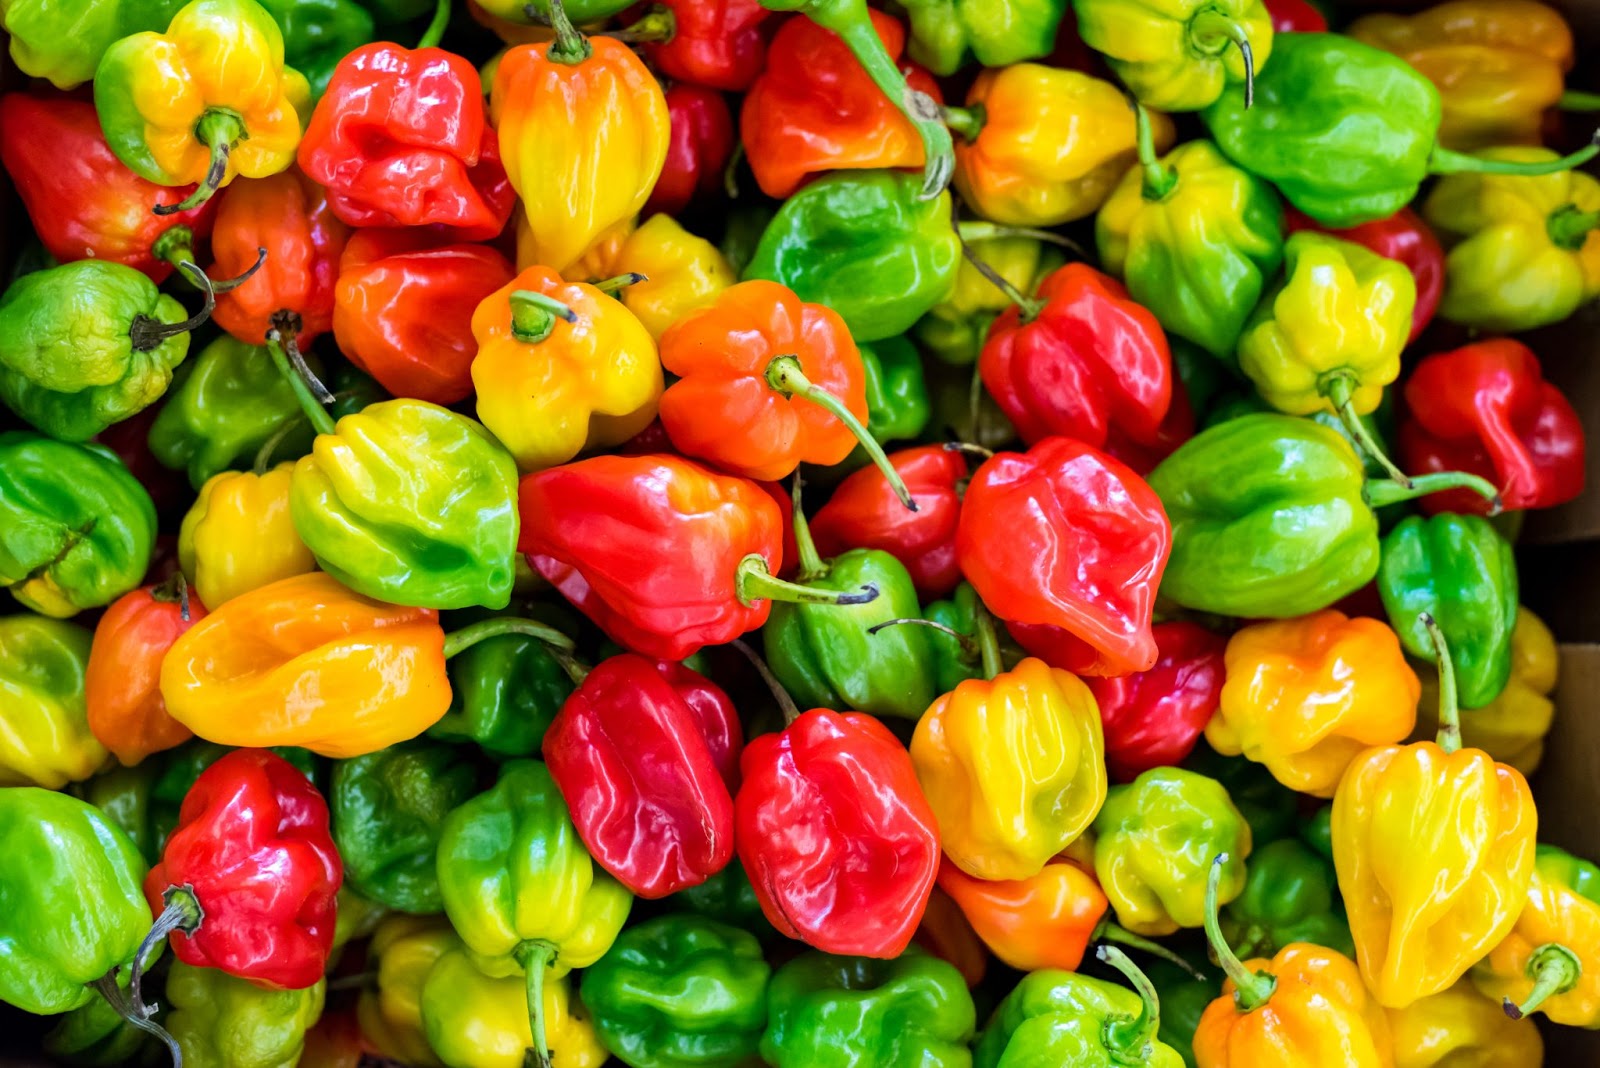 How Hot Is A Habanero? Breaking Down The Spice Levels